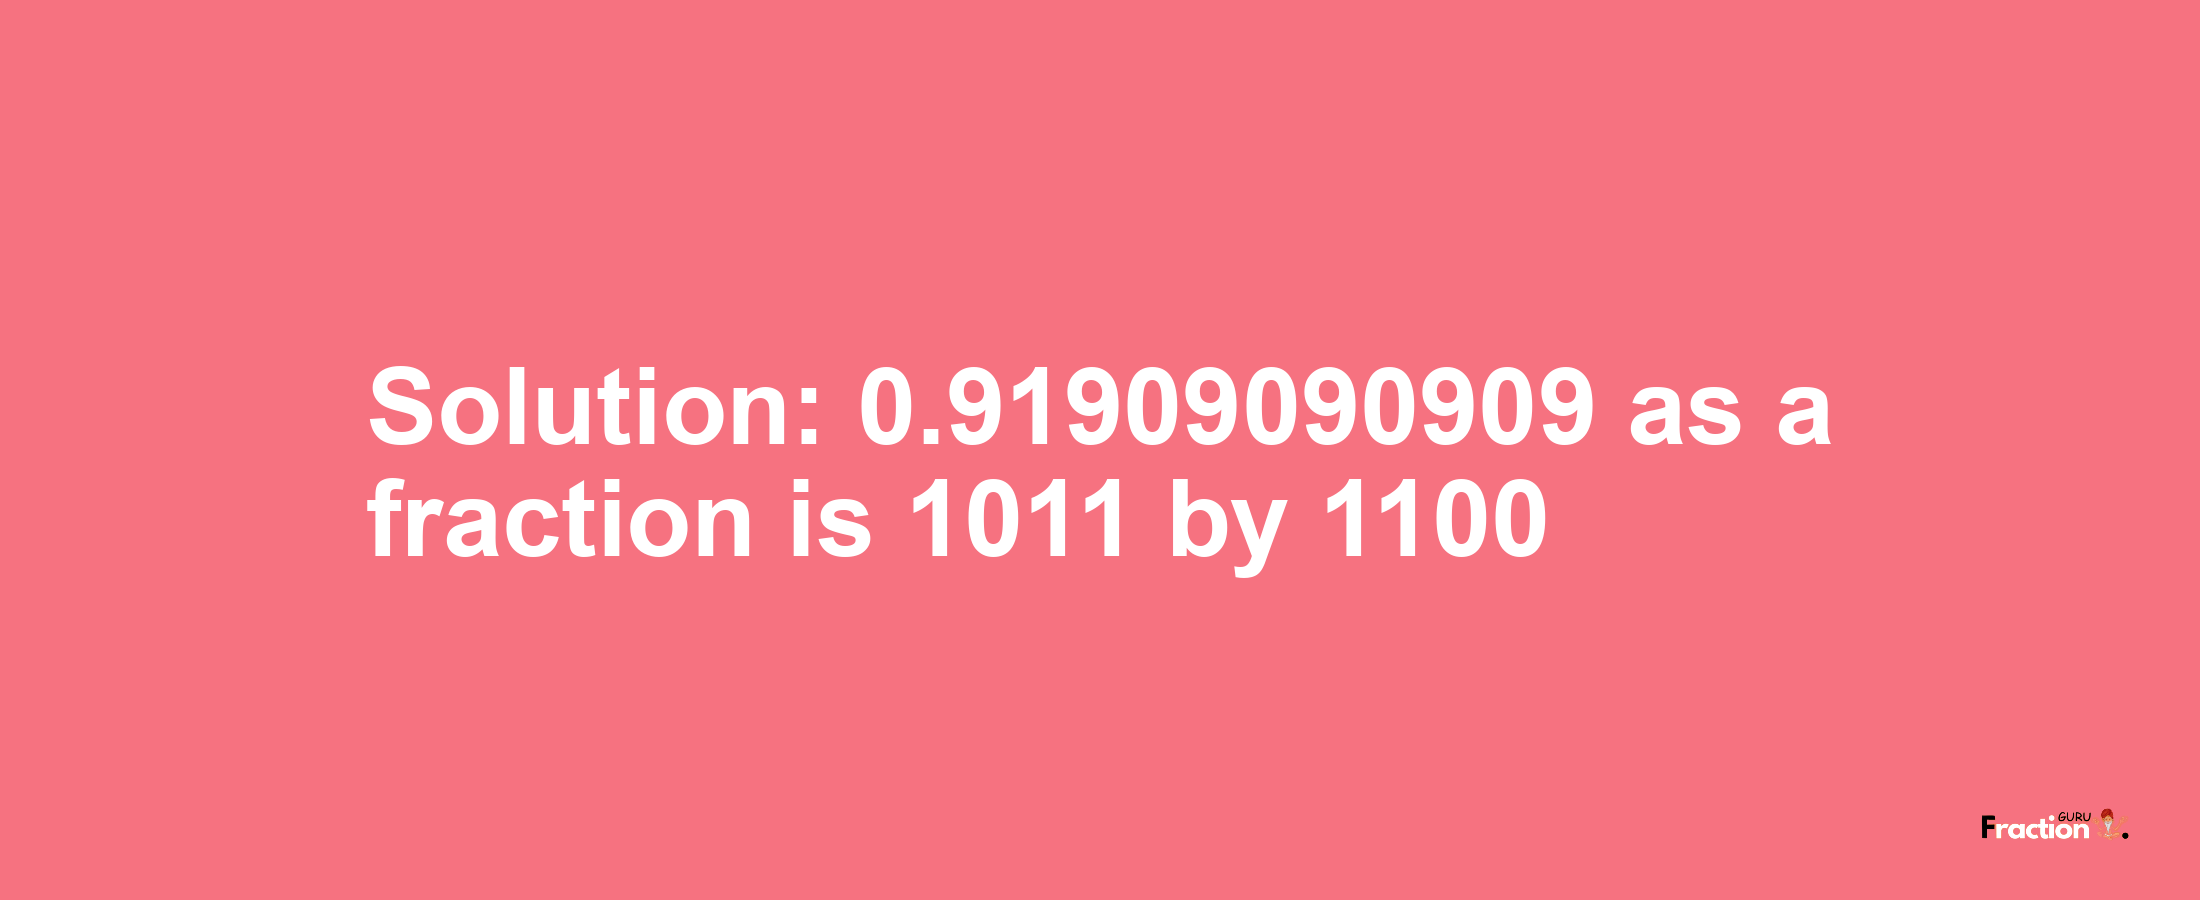 Solution:0.91909090909 as a fraction is 1011/1100